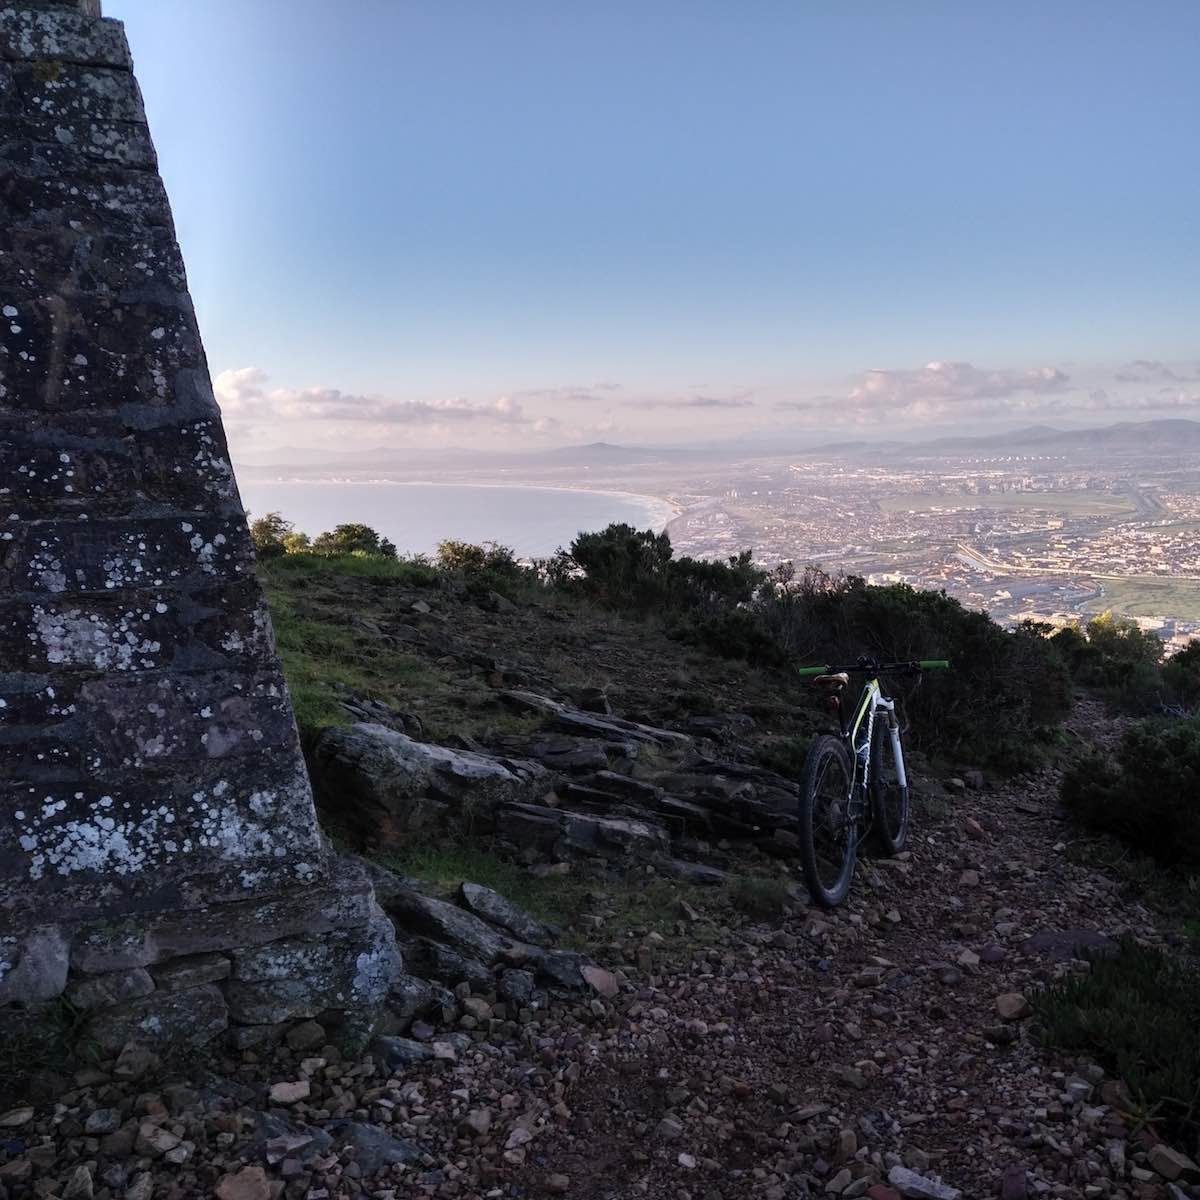 bikerumor pic of the day devil's peak in cape town, south africa.